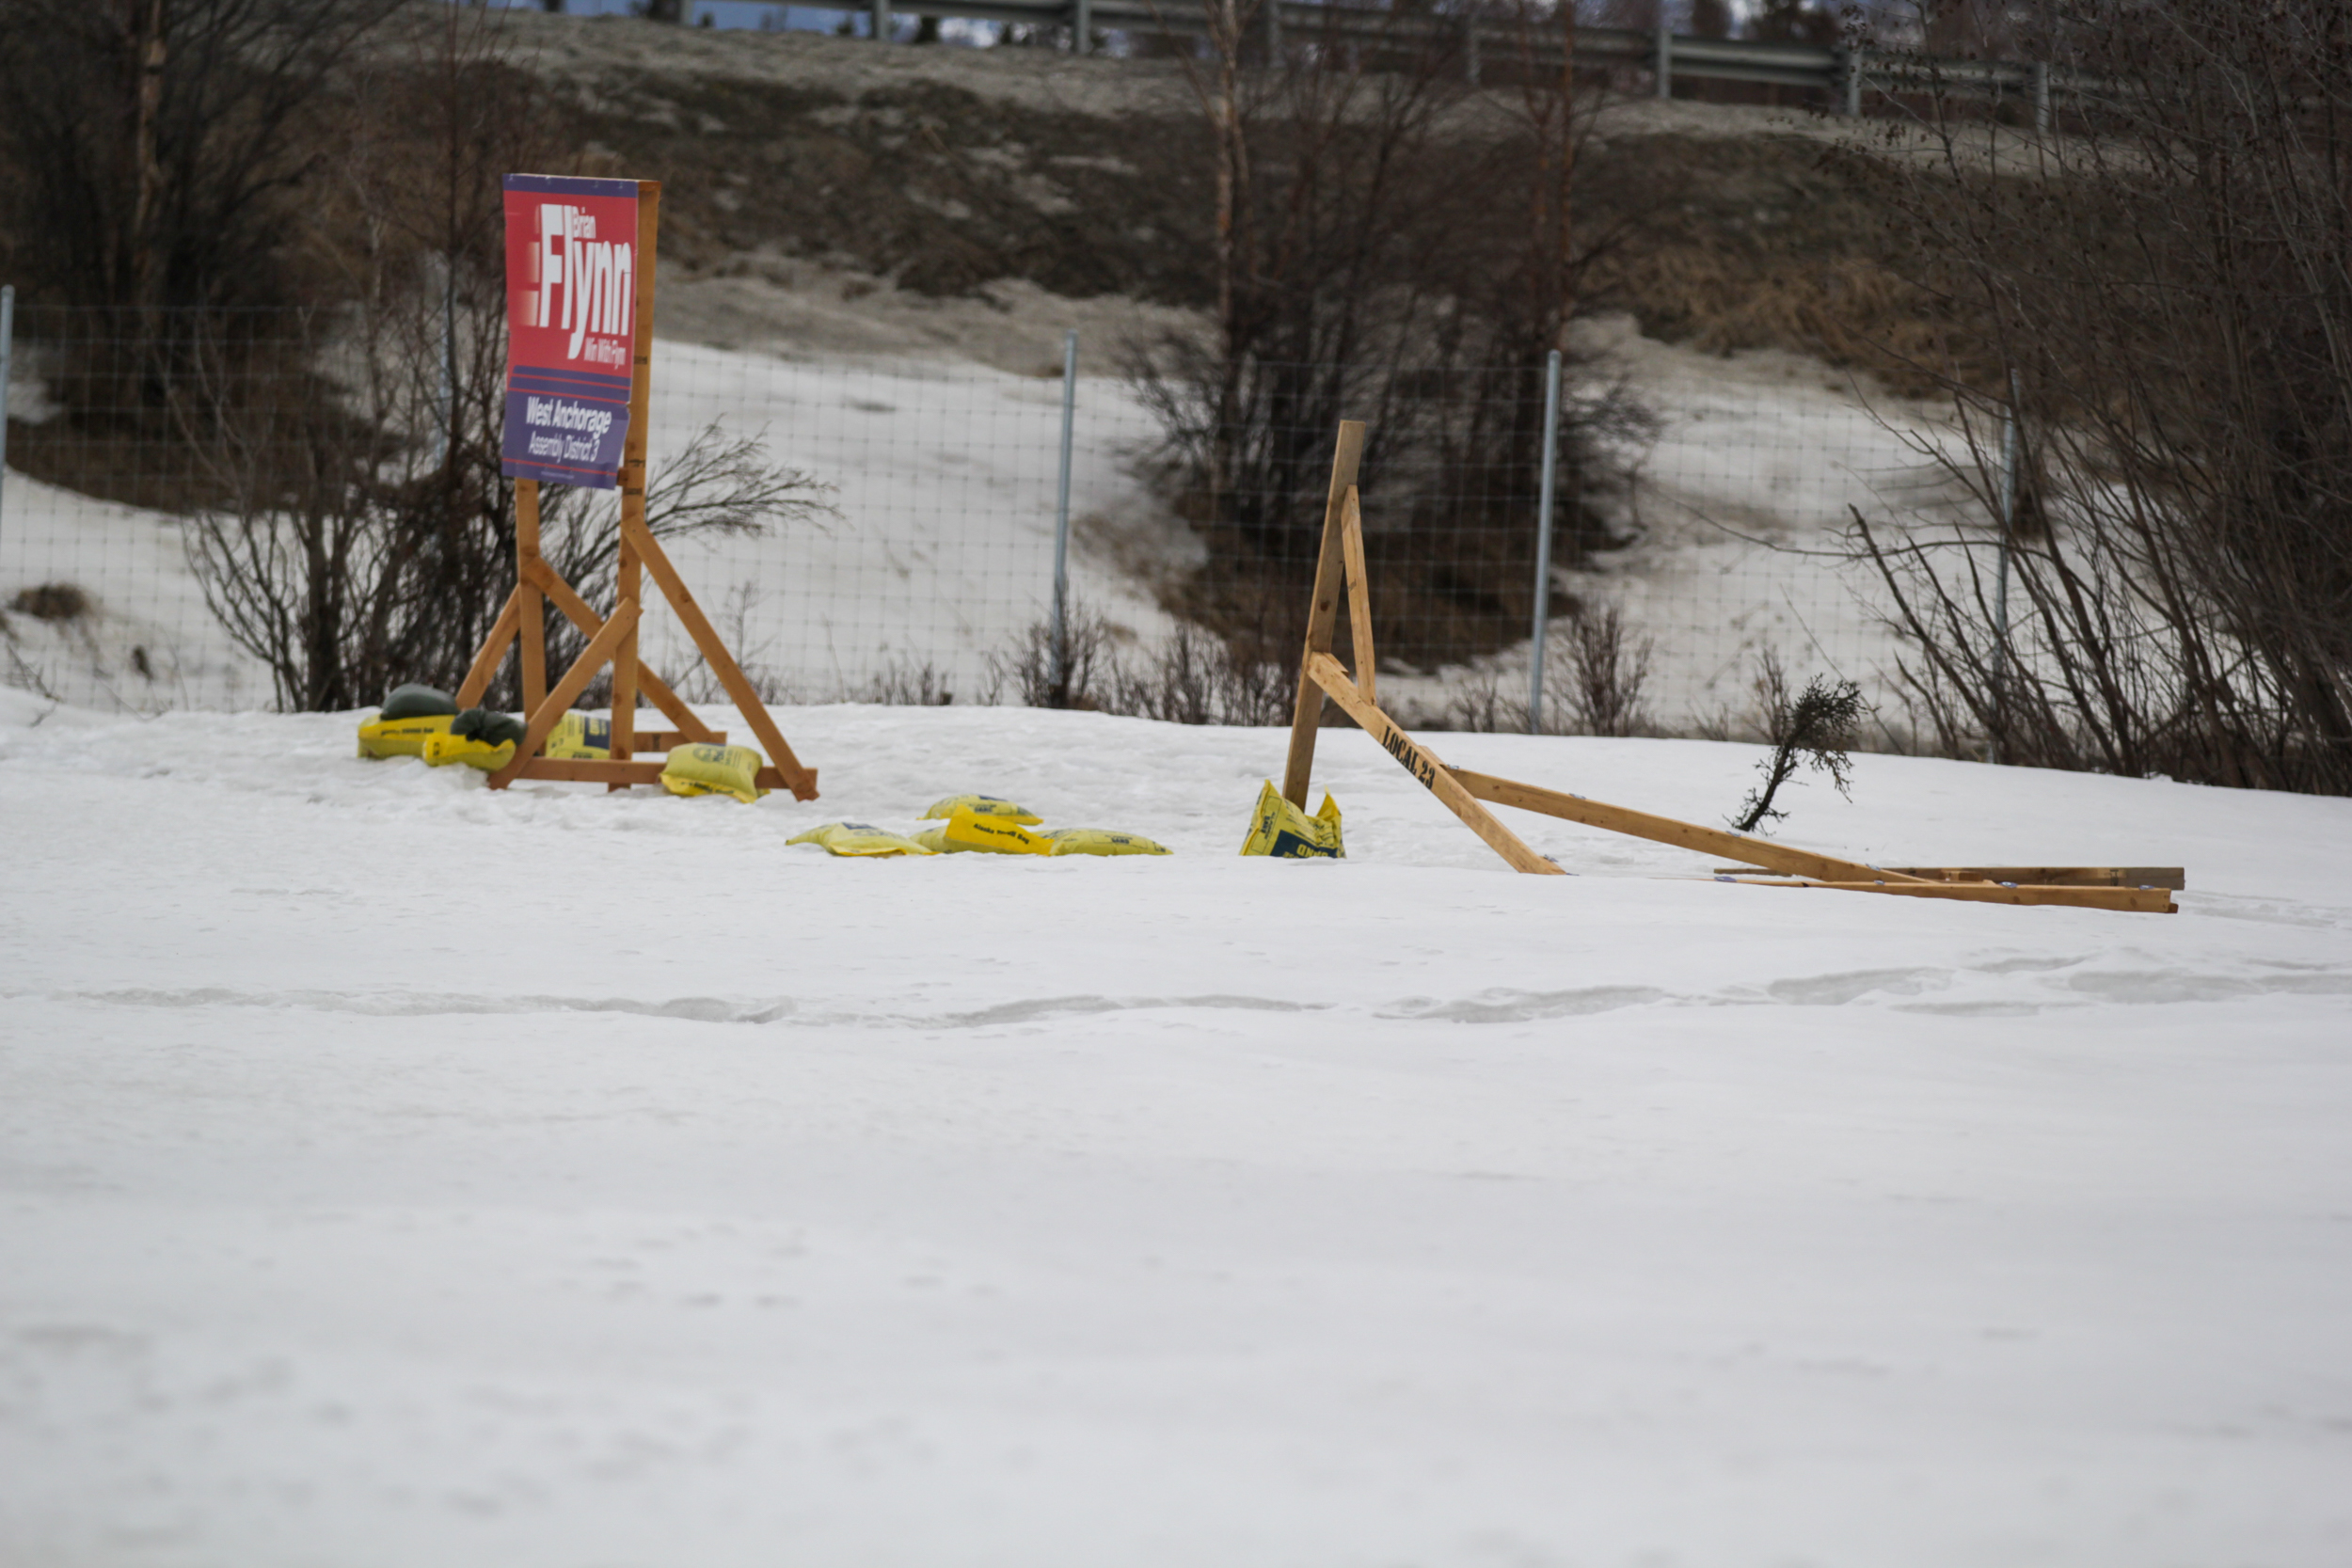 wooden sign holders and sand bags are strewn on the snow-covered ground. In the background, a wooden frame holds another political sign.